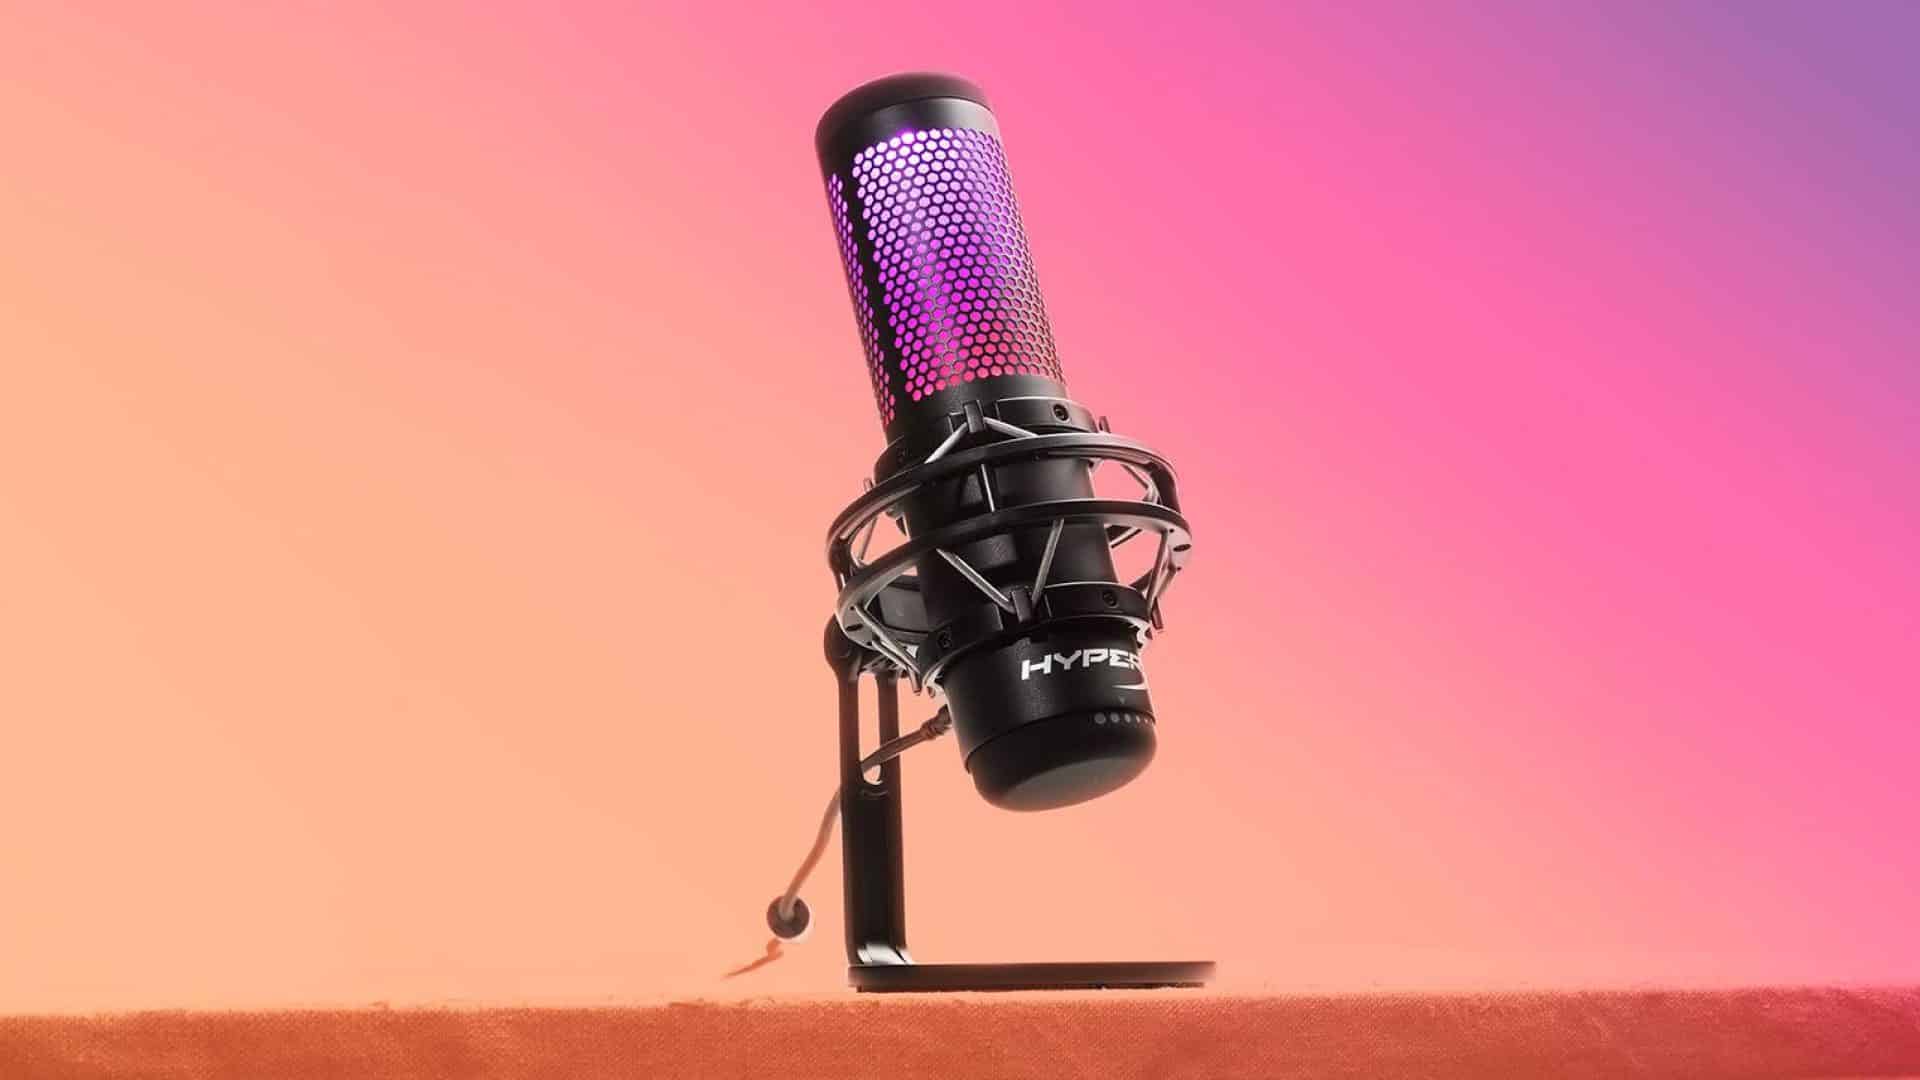 Best Mics for Content Creation